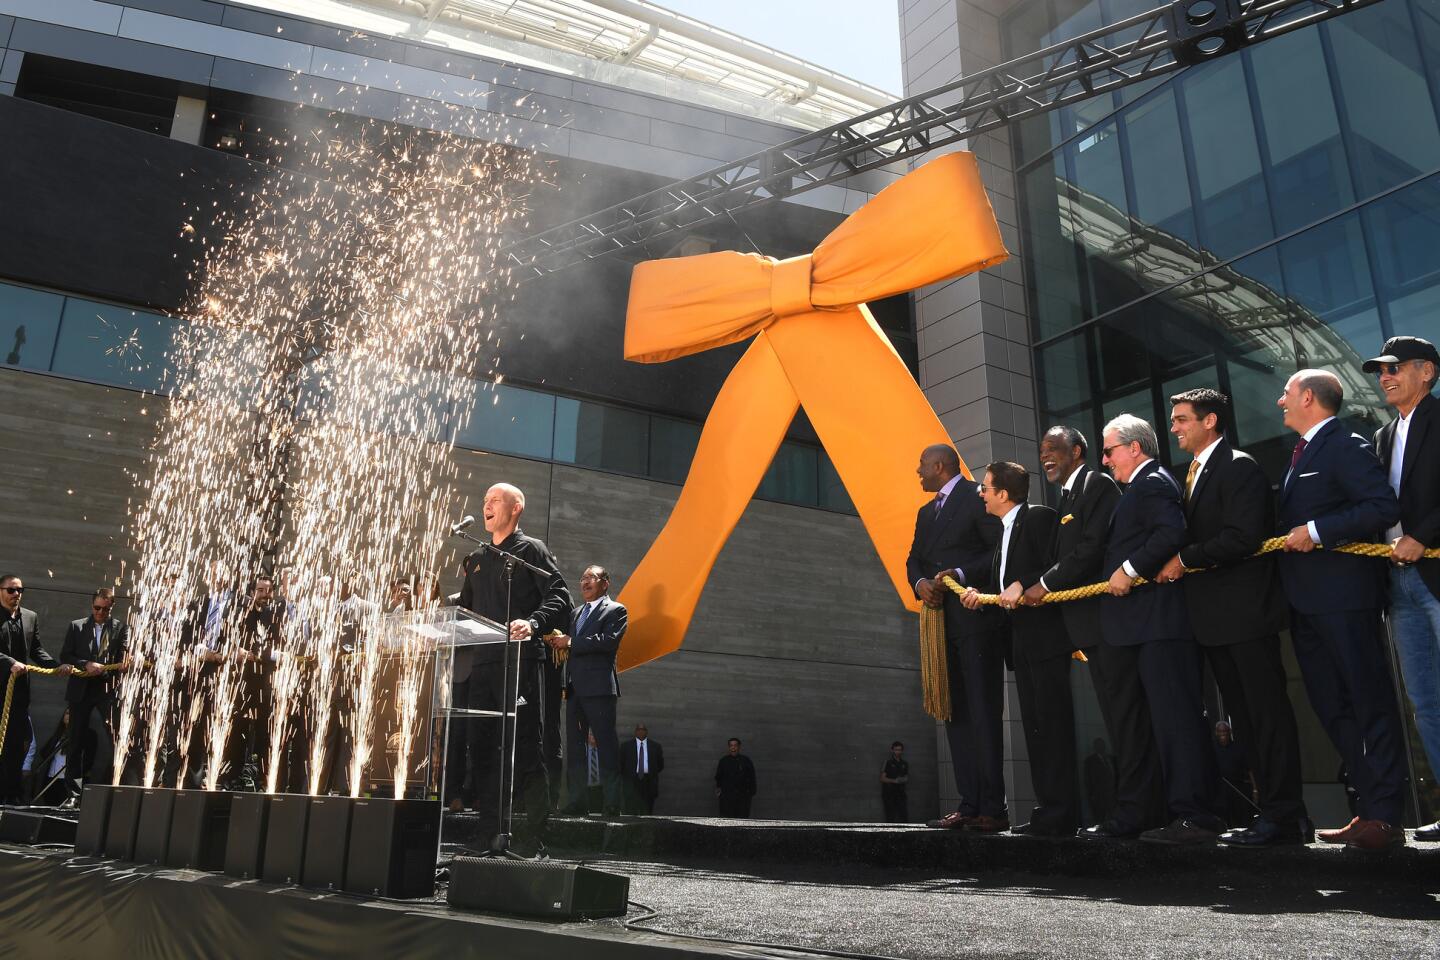 LAFC head coach Bob Bradley welcomes dignitaries outside the Banc of California Stadium for the ribbon cutting on April 18.